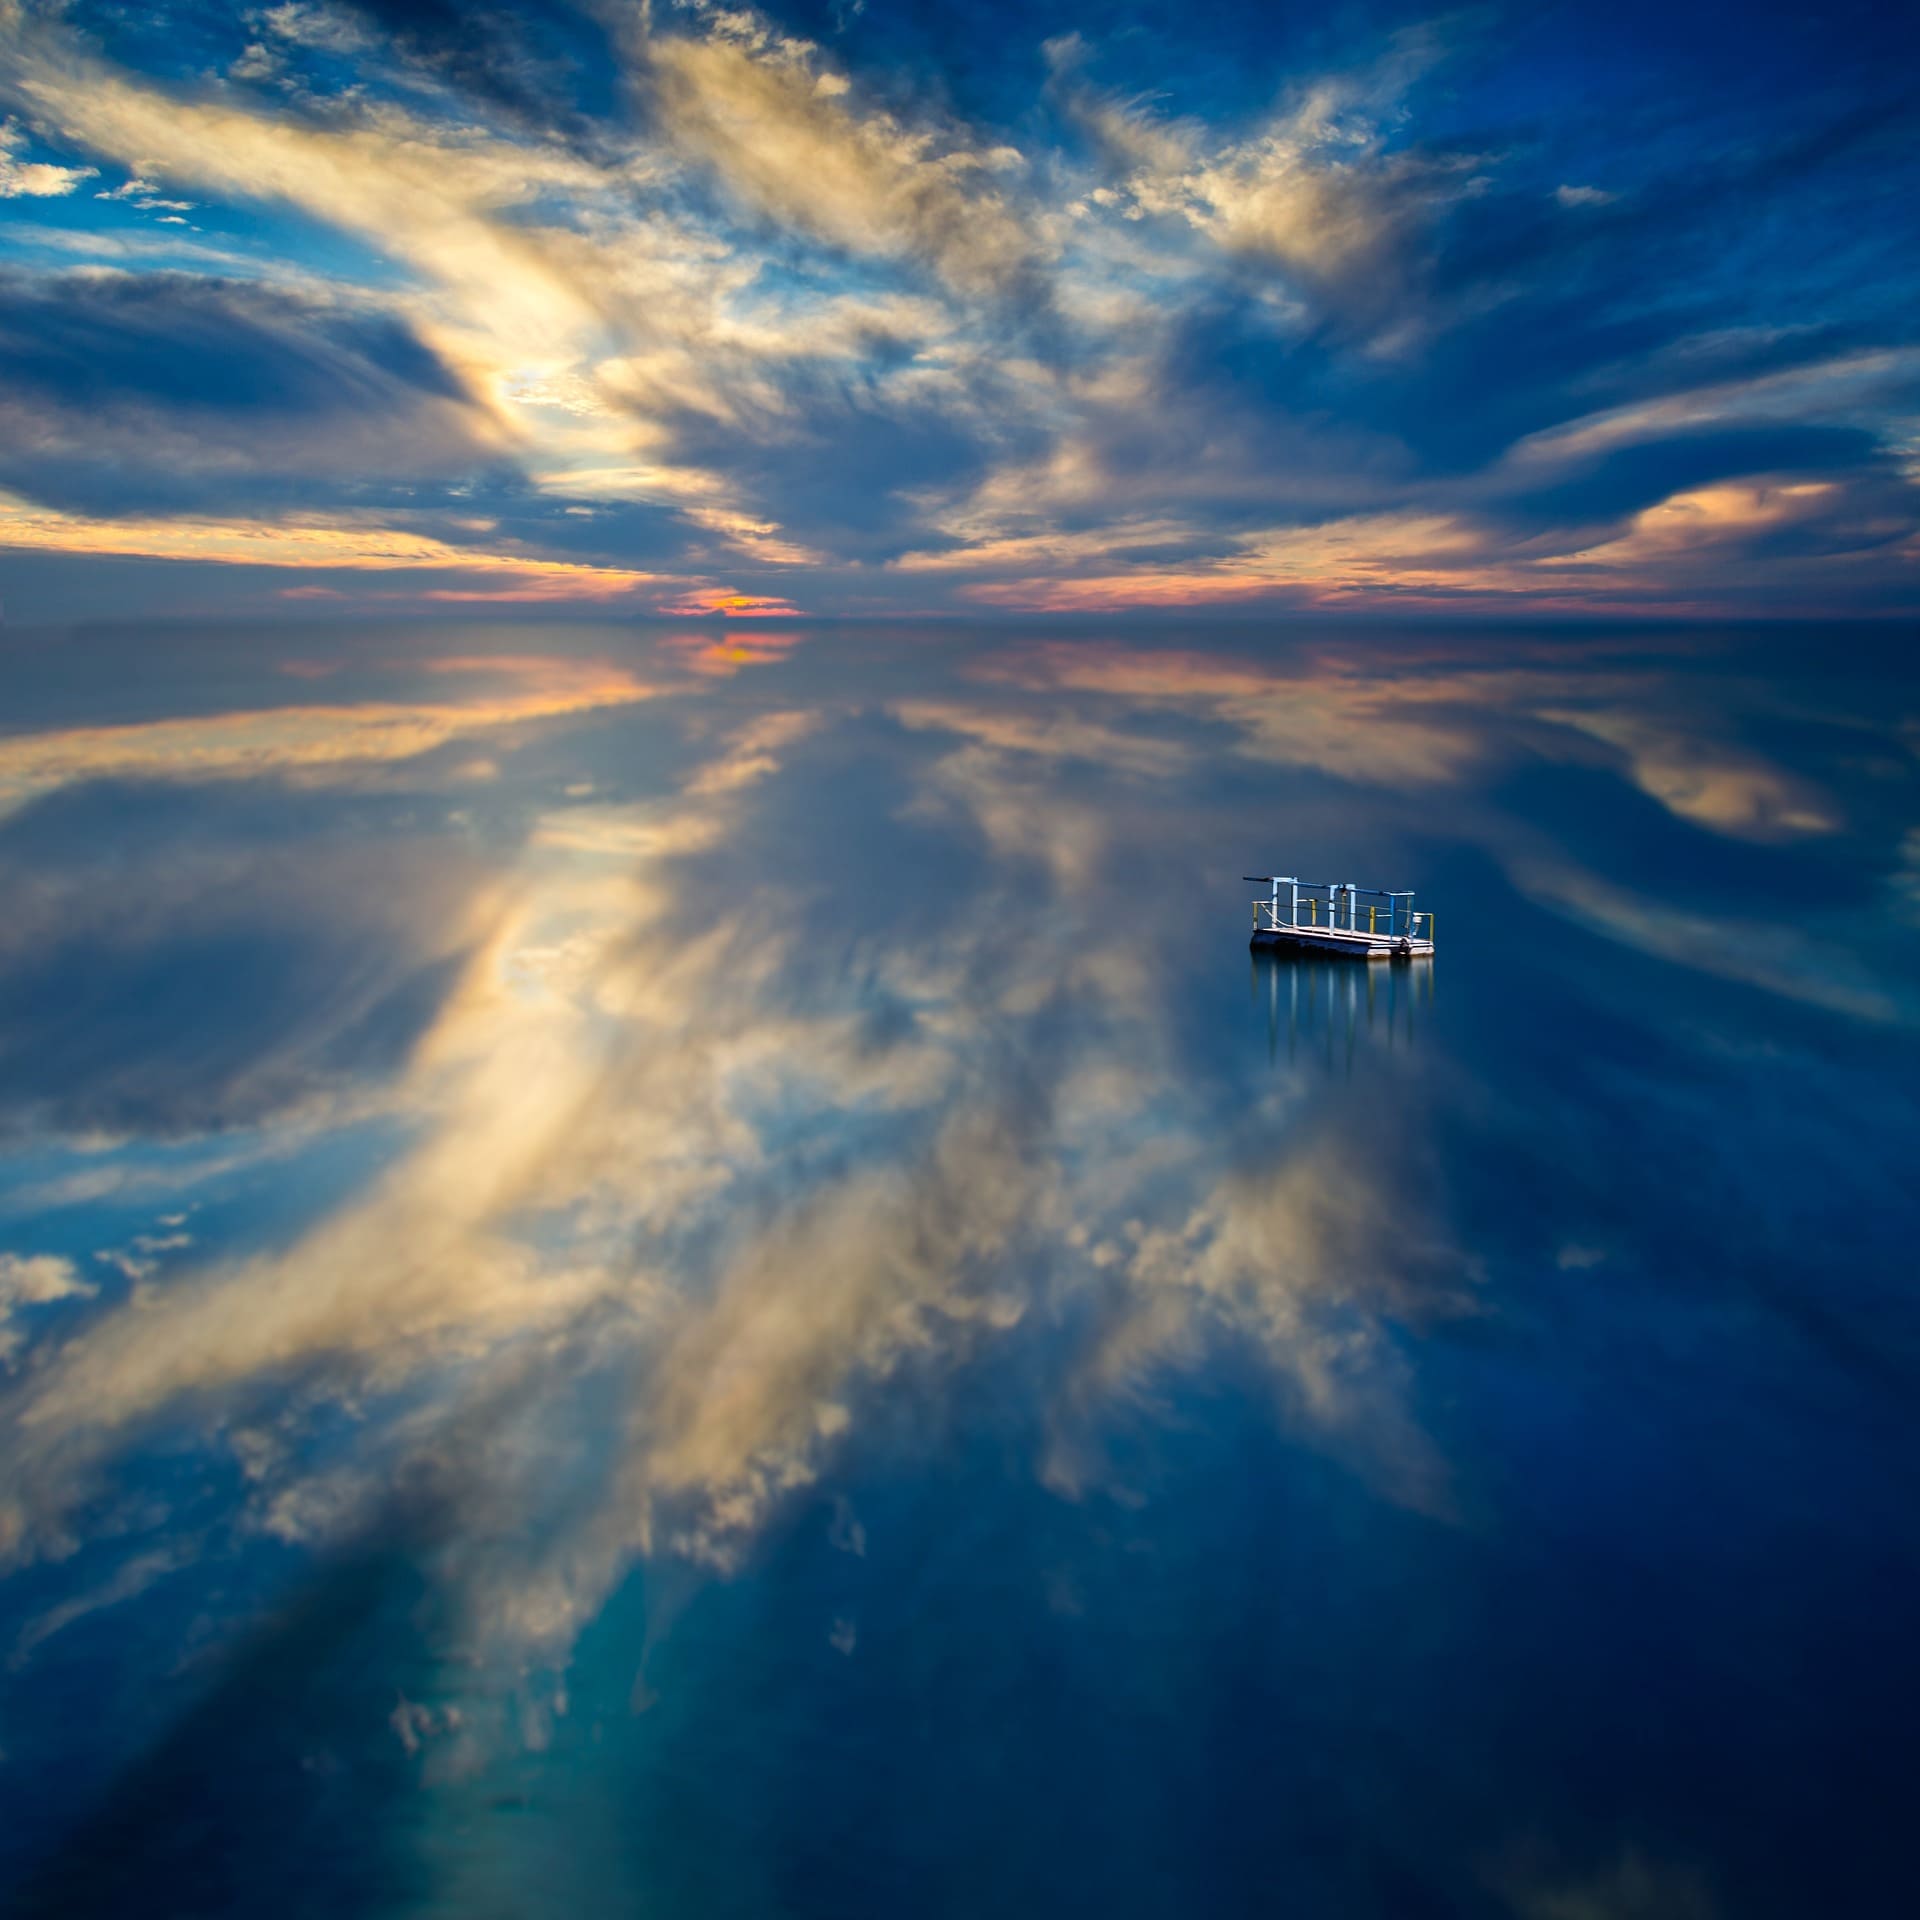 A picture of Sky, Clouds and water to depict peacefulness which is Mindfulness